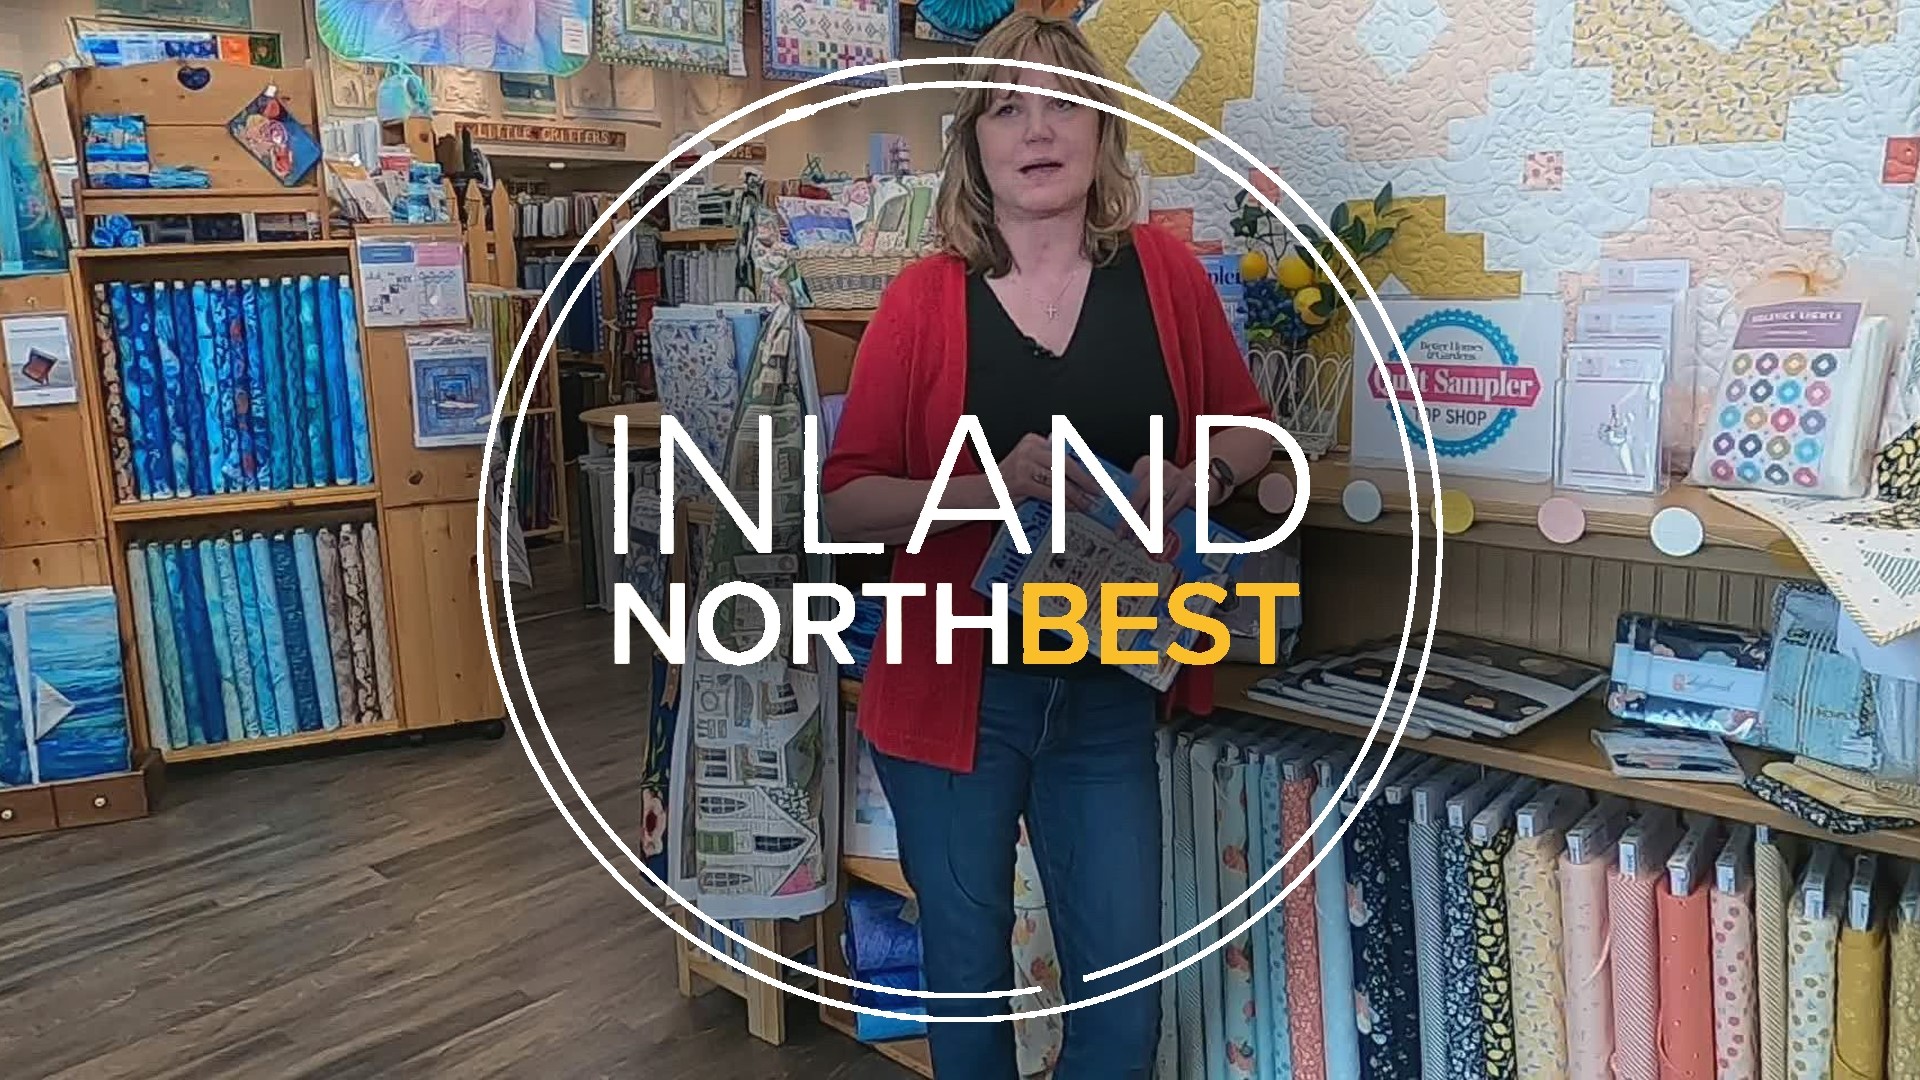 Earlier this year we told you about the Spokane Valley local shop featured in the Quilt Sampler magazine. Now, business is buzzing at The Quilting Bee.